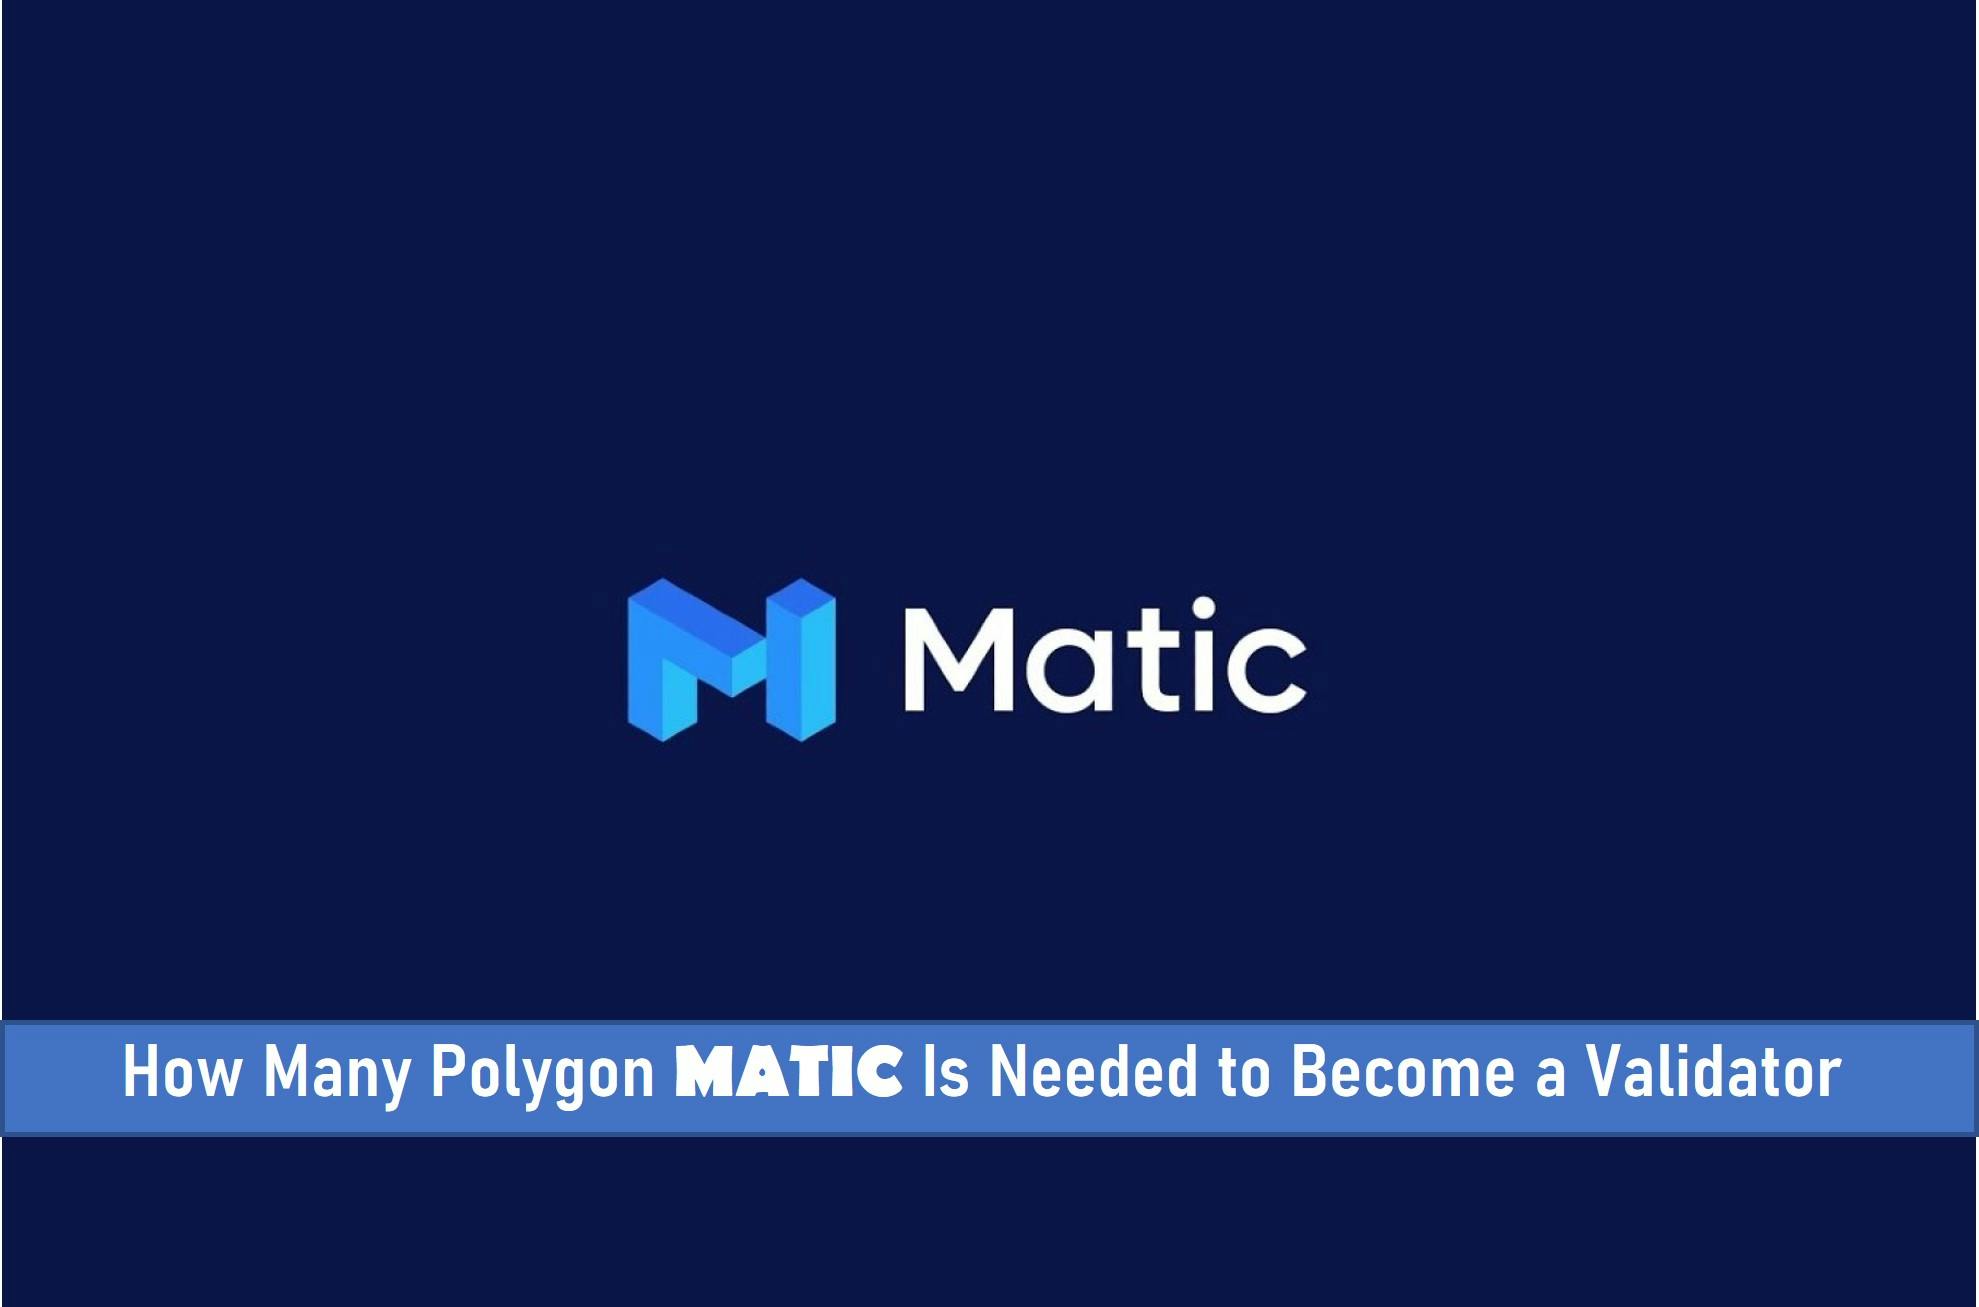 How Many Polygon Matics is Needed to Become a Validator